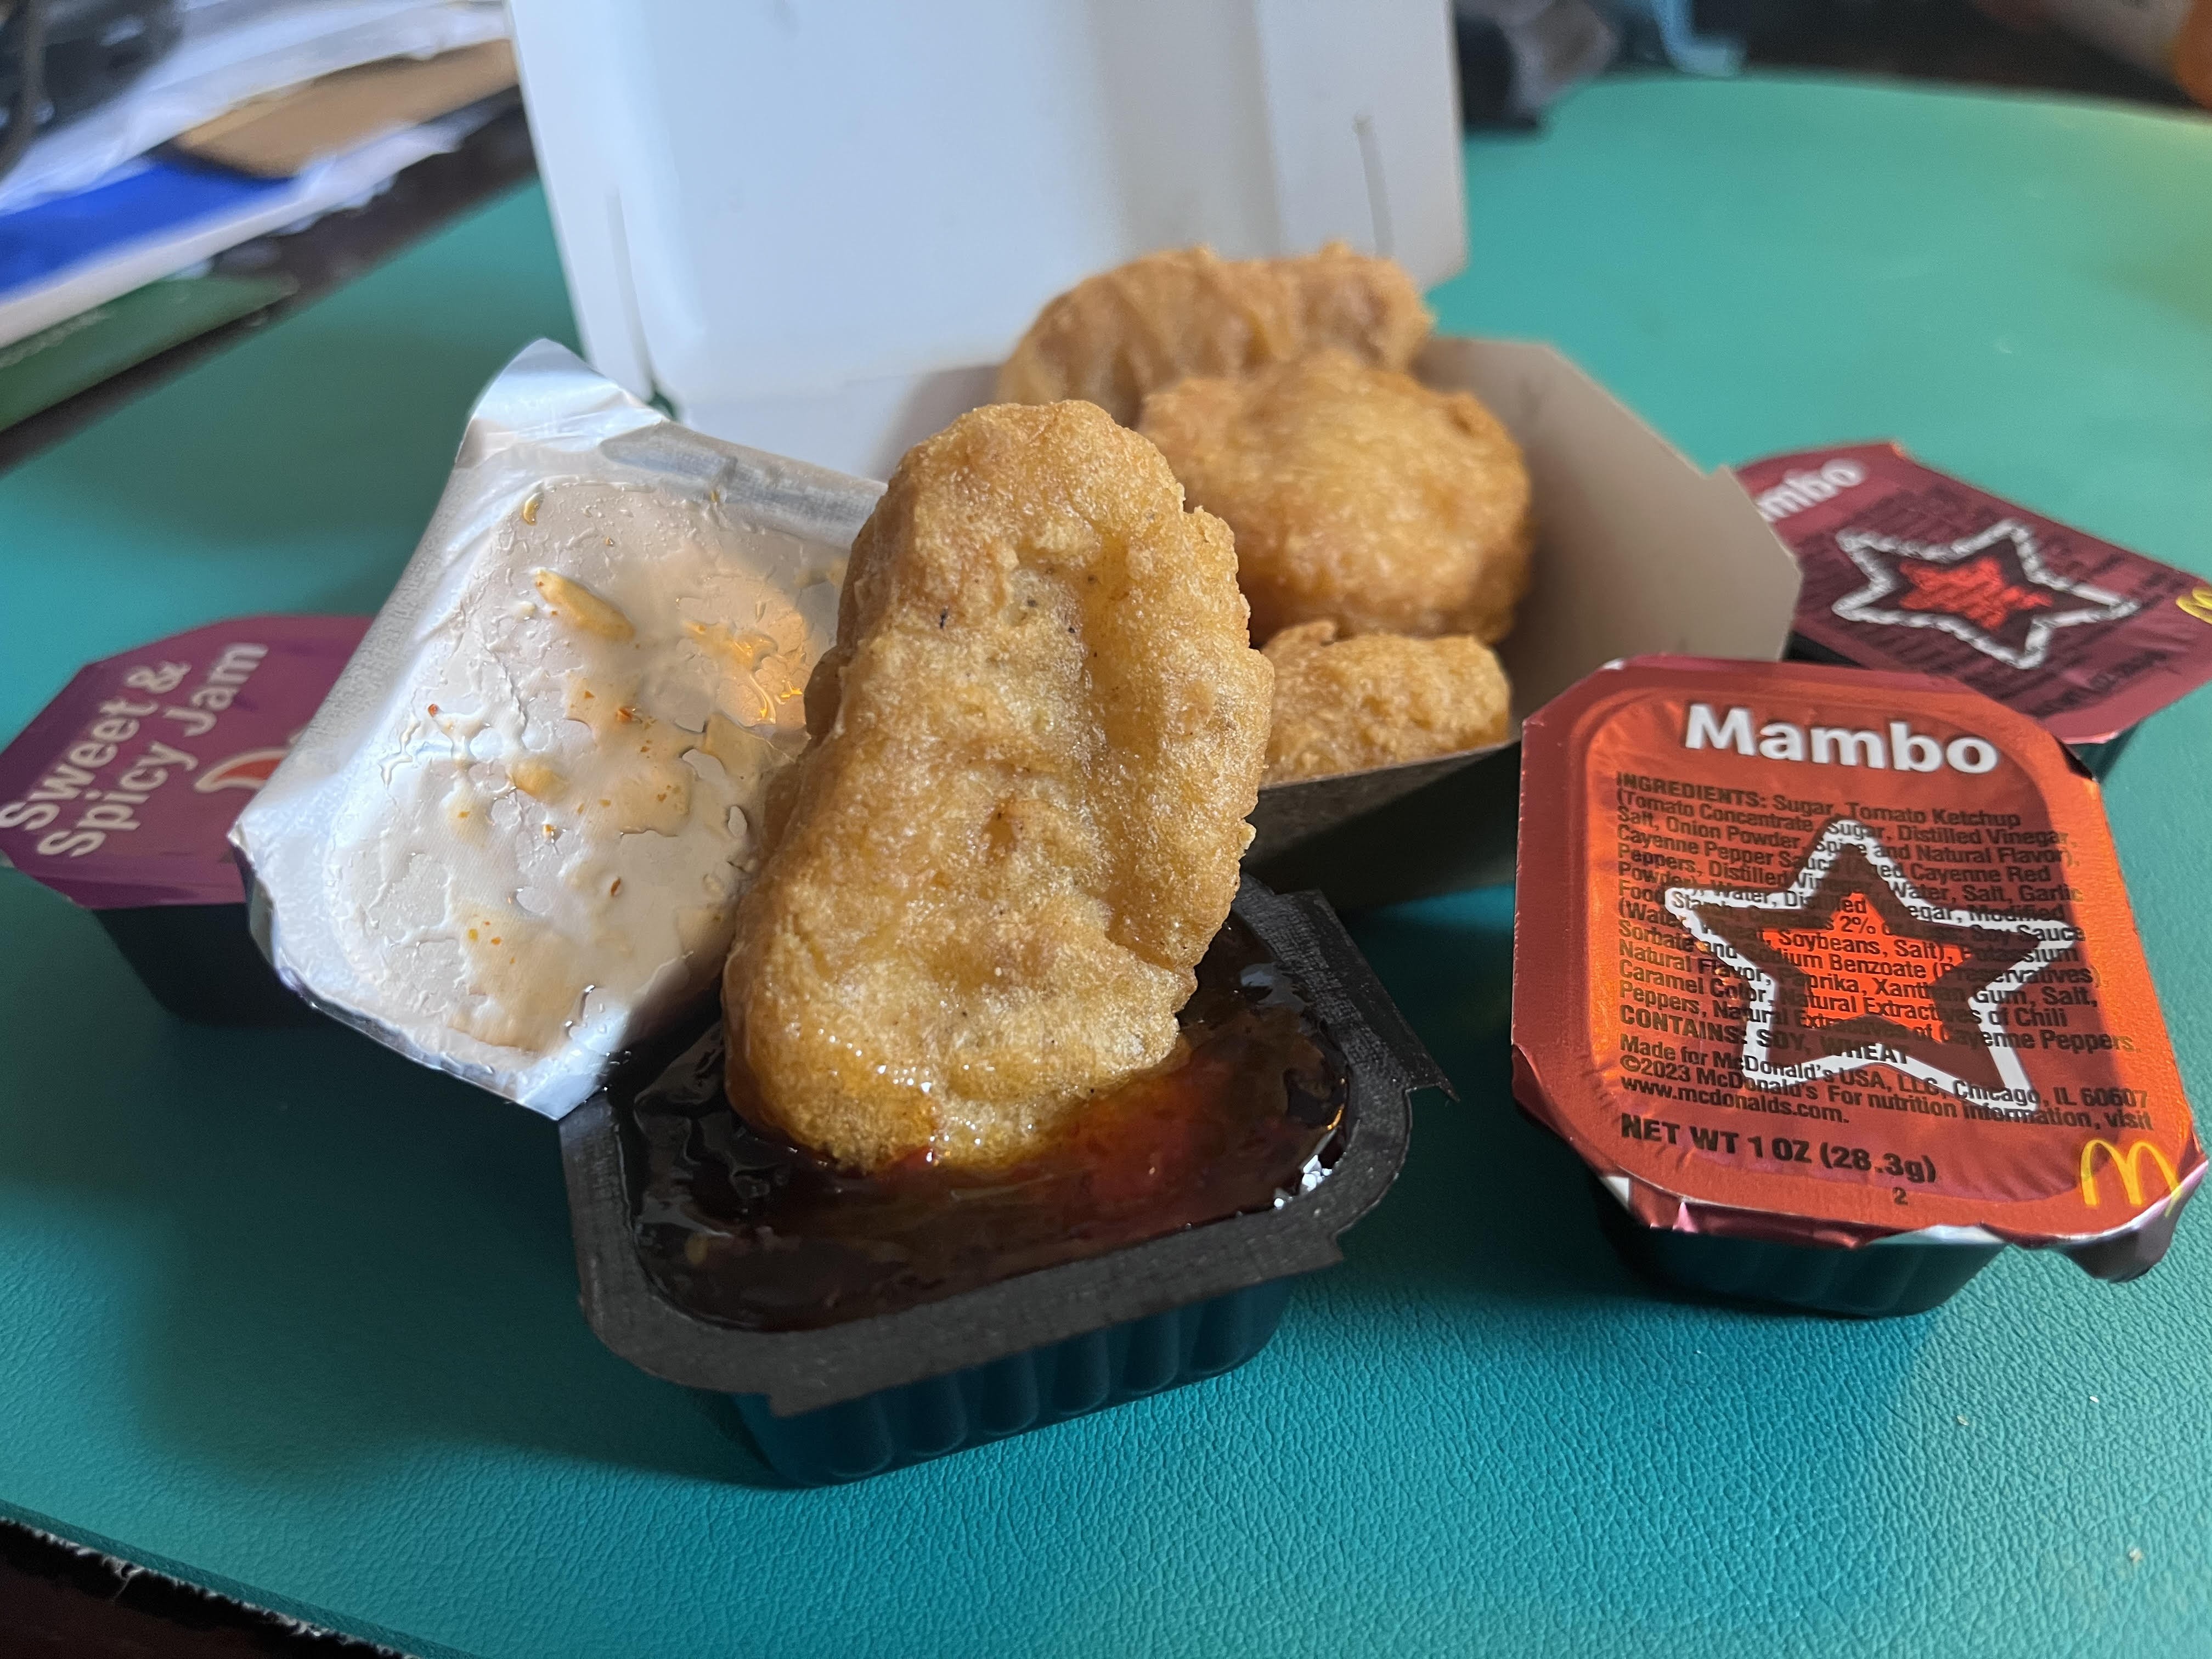 Taste-Tested: McDonald's New Mambo and Sweet and Spicy Sauces